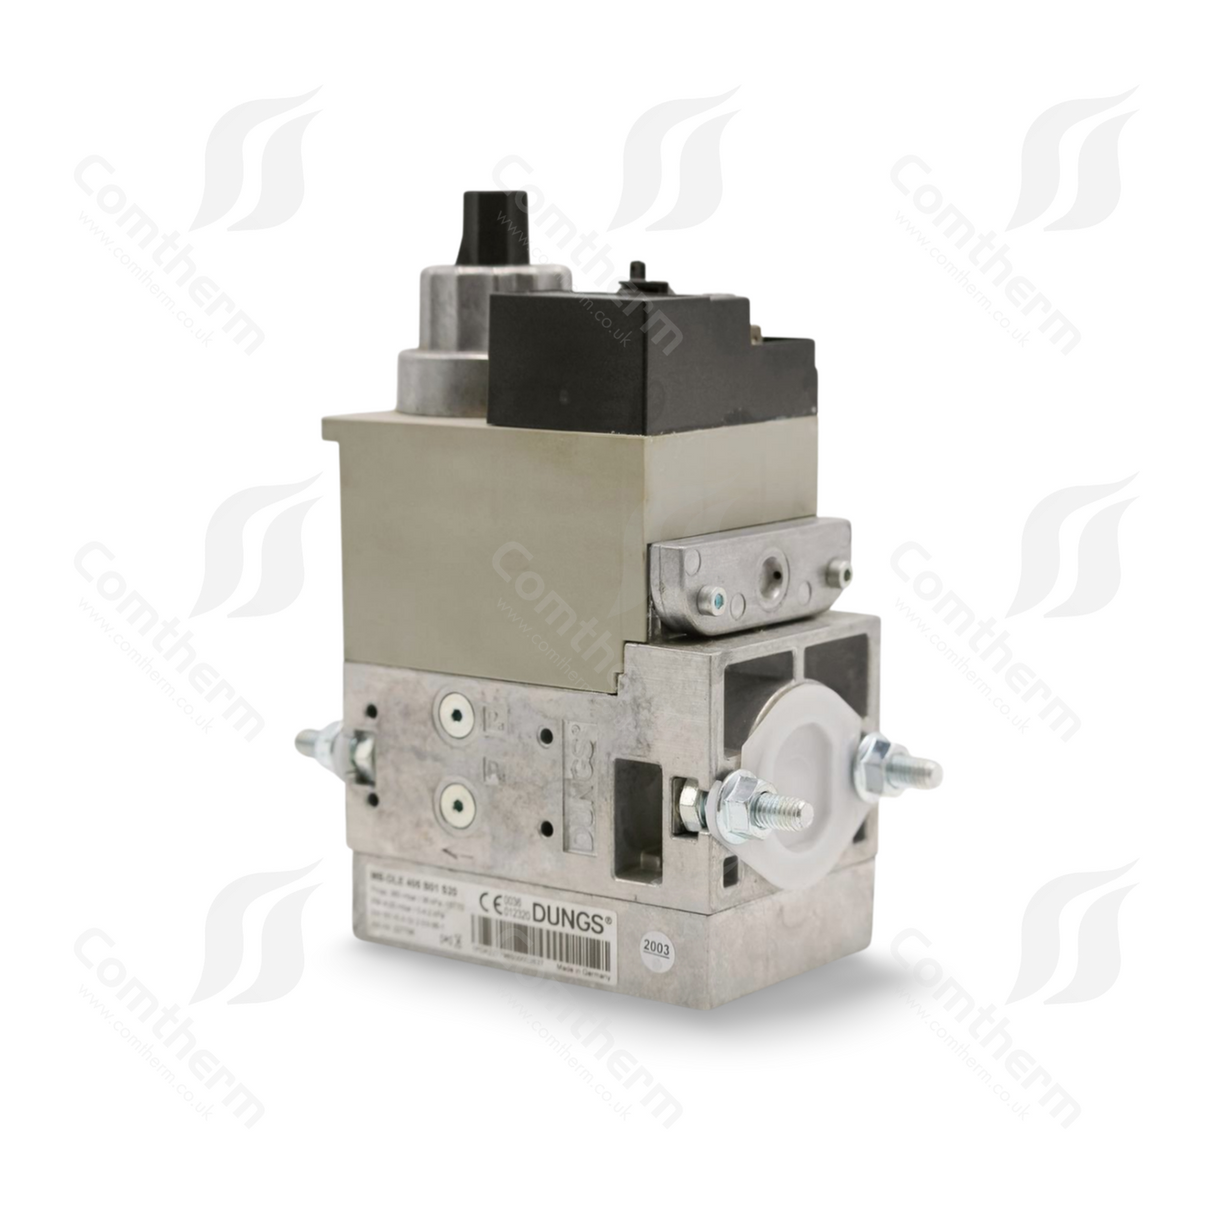 Dungs MB-DLE 410 B01 S20 Multibloc Gas Valve - 110v